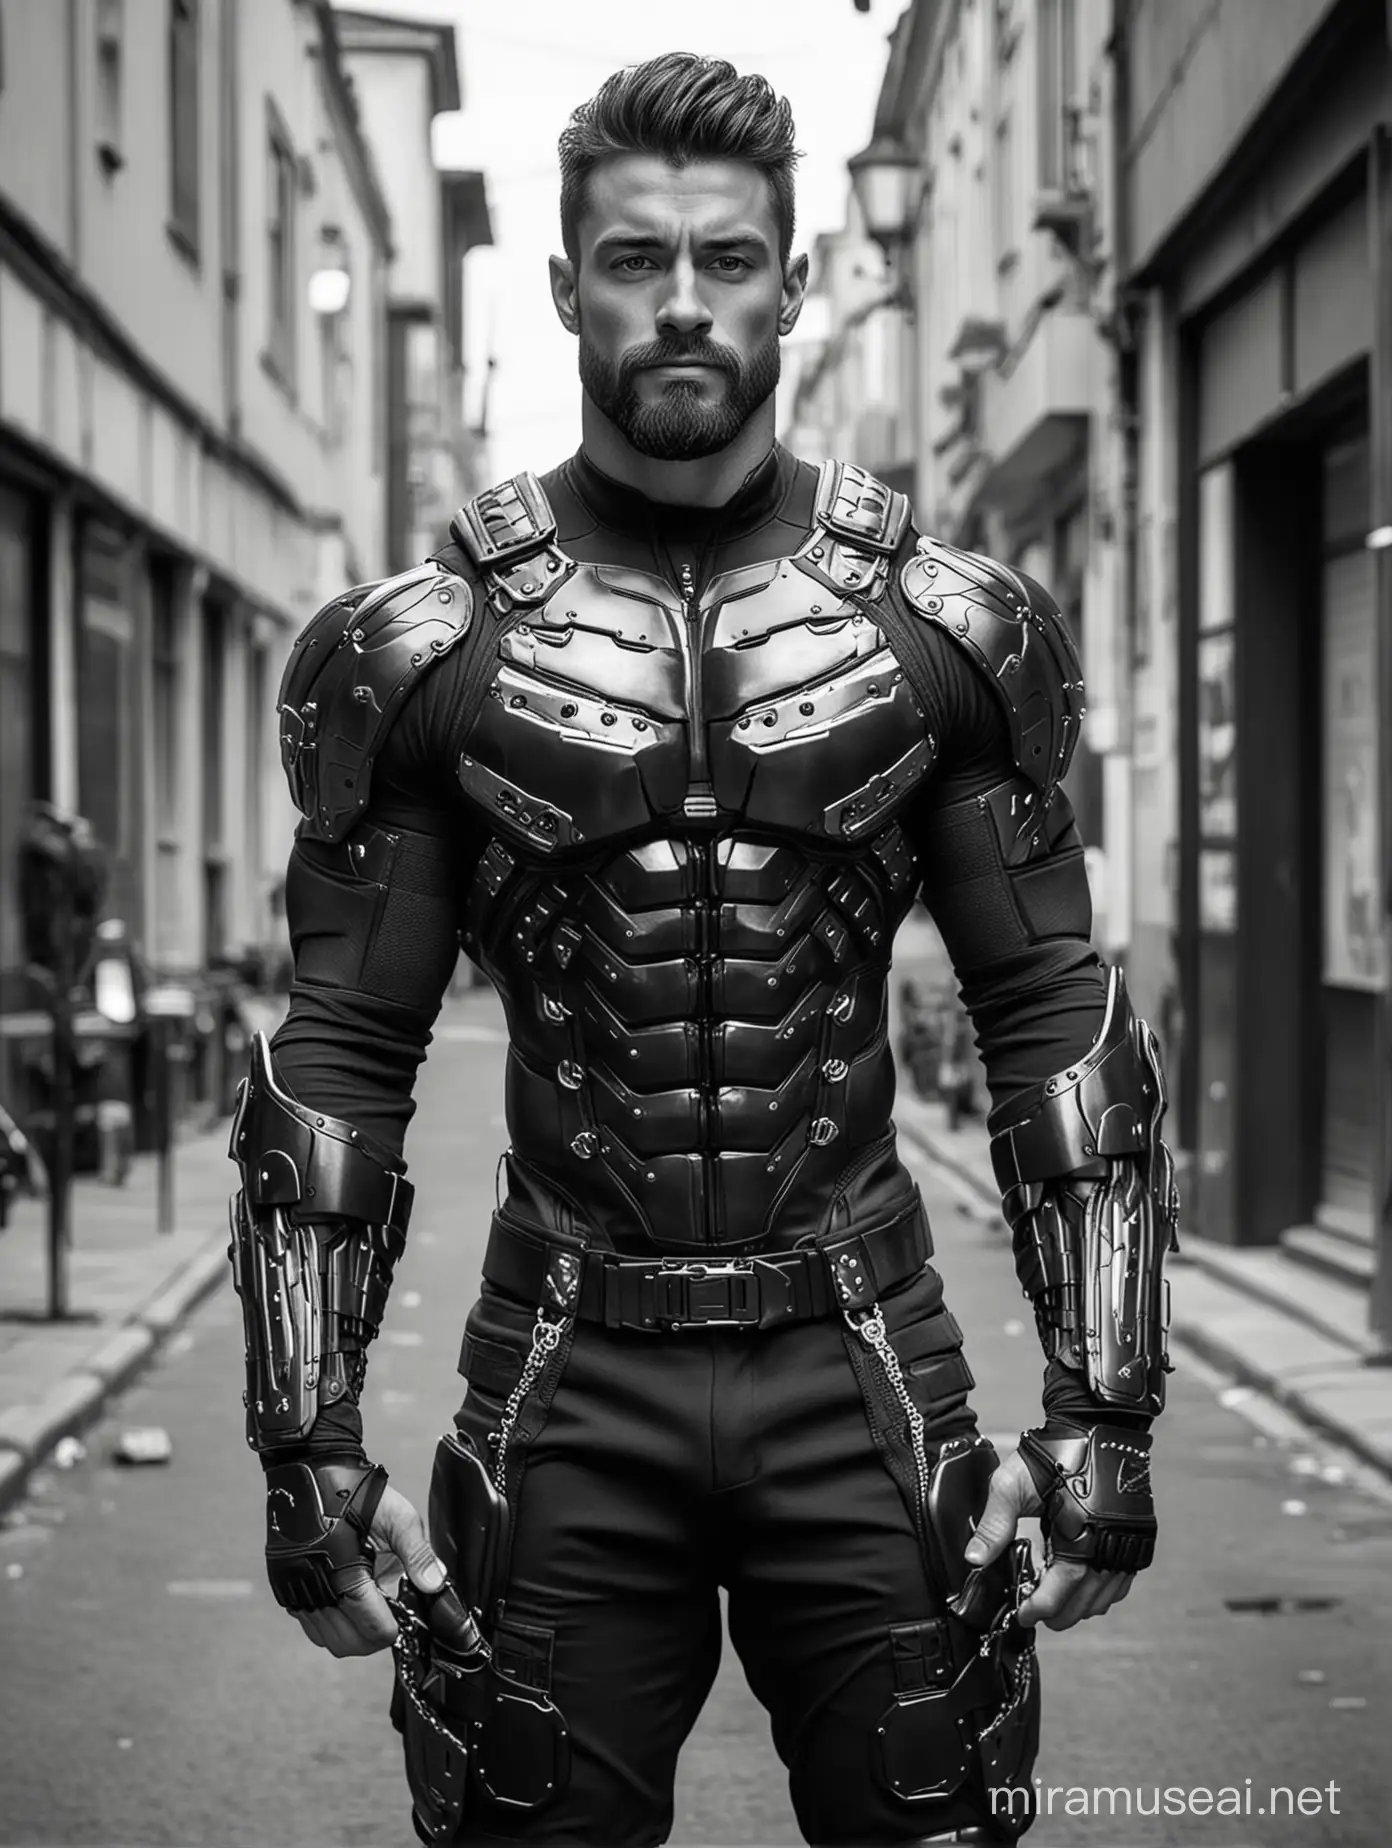 Tall and handsome bodybuilder men with beautiful hairstyle and beard with attractive eyes and Big wide shoulder and chest in modern High tech black and white armour suit with firearms on hands walking on street 